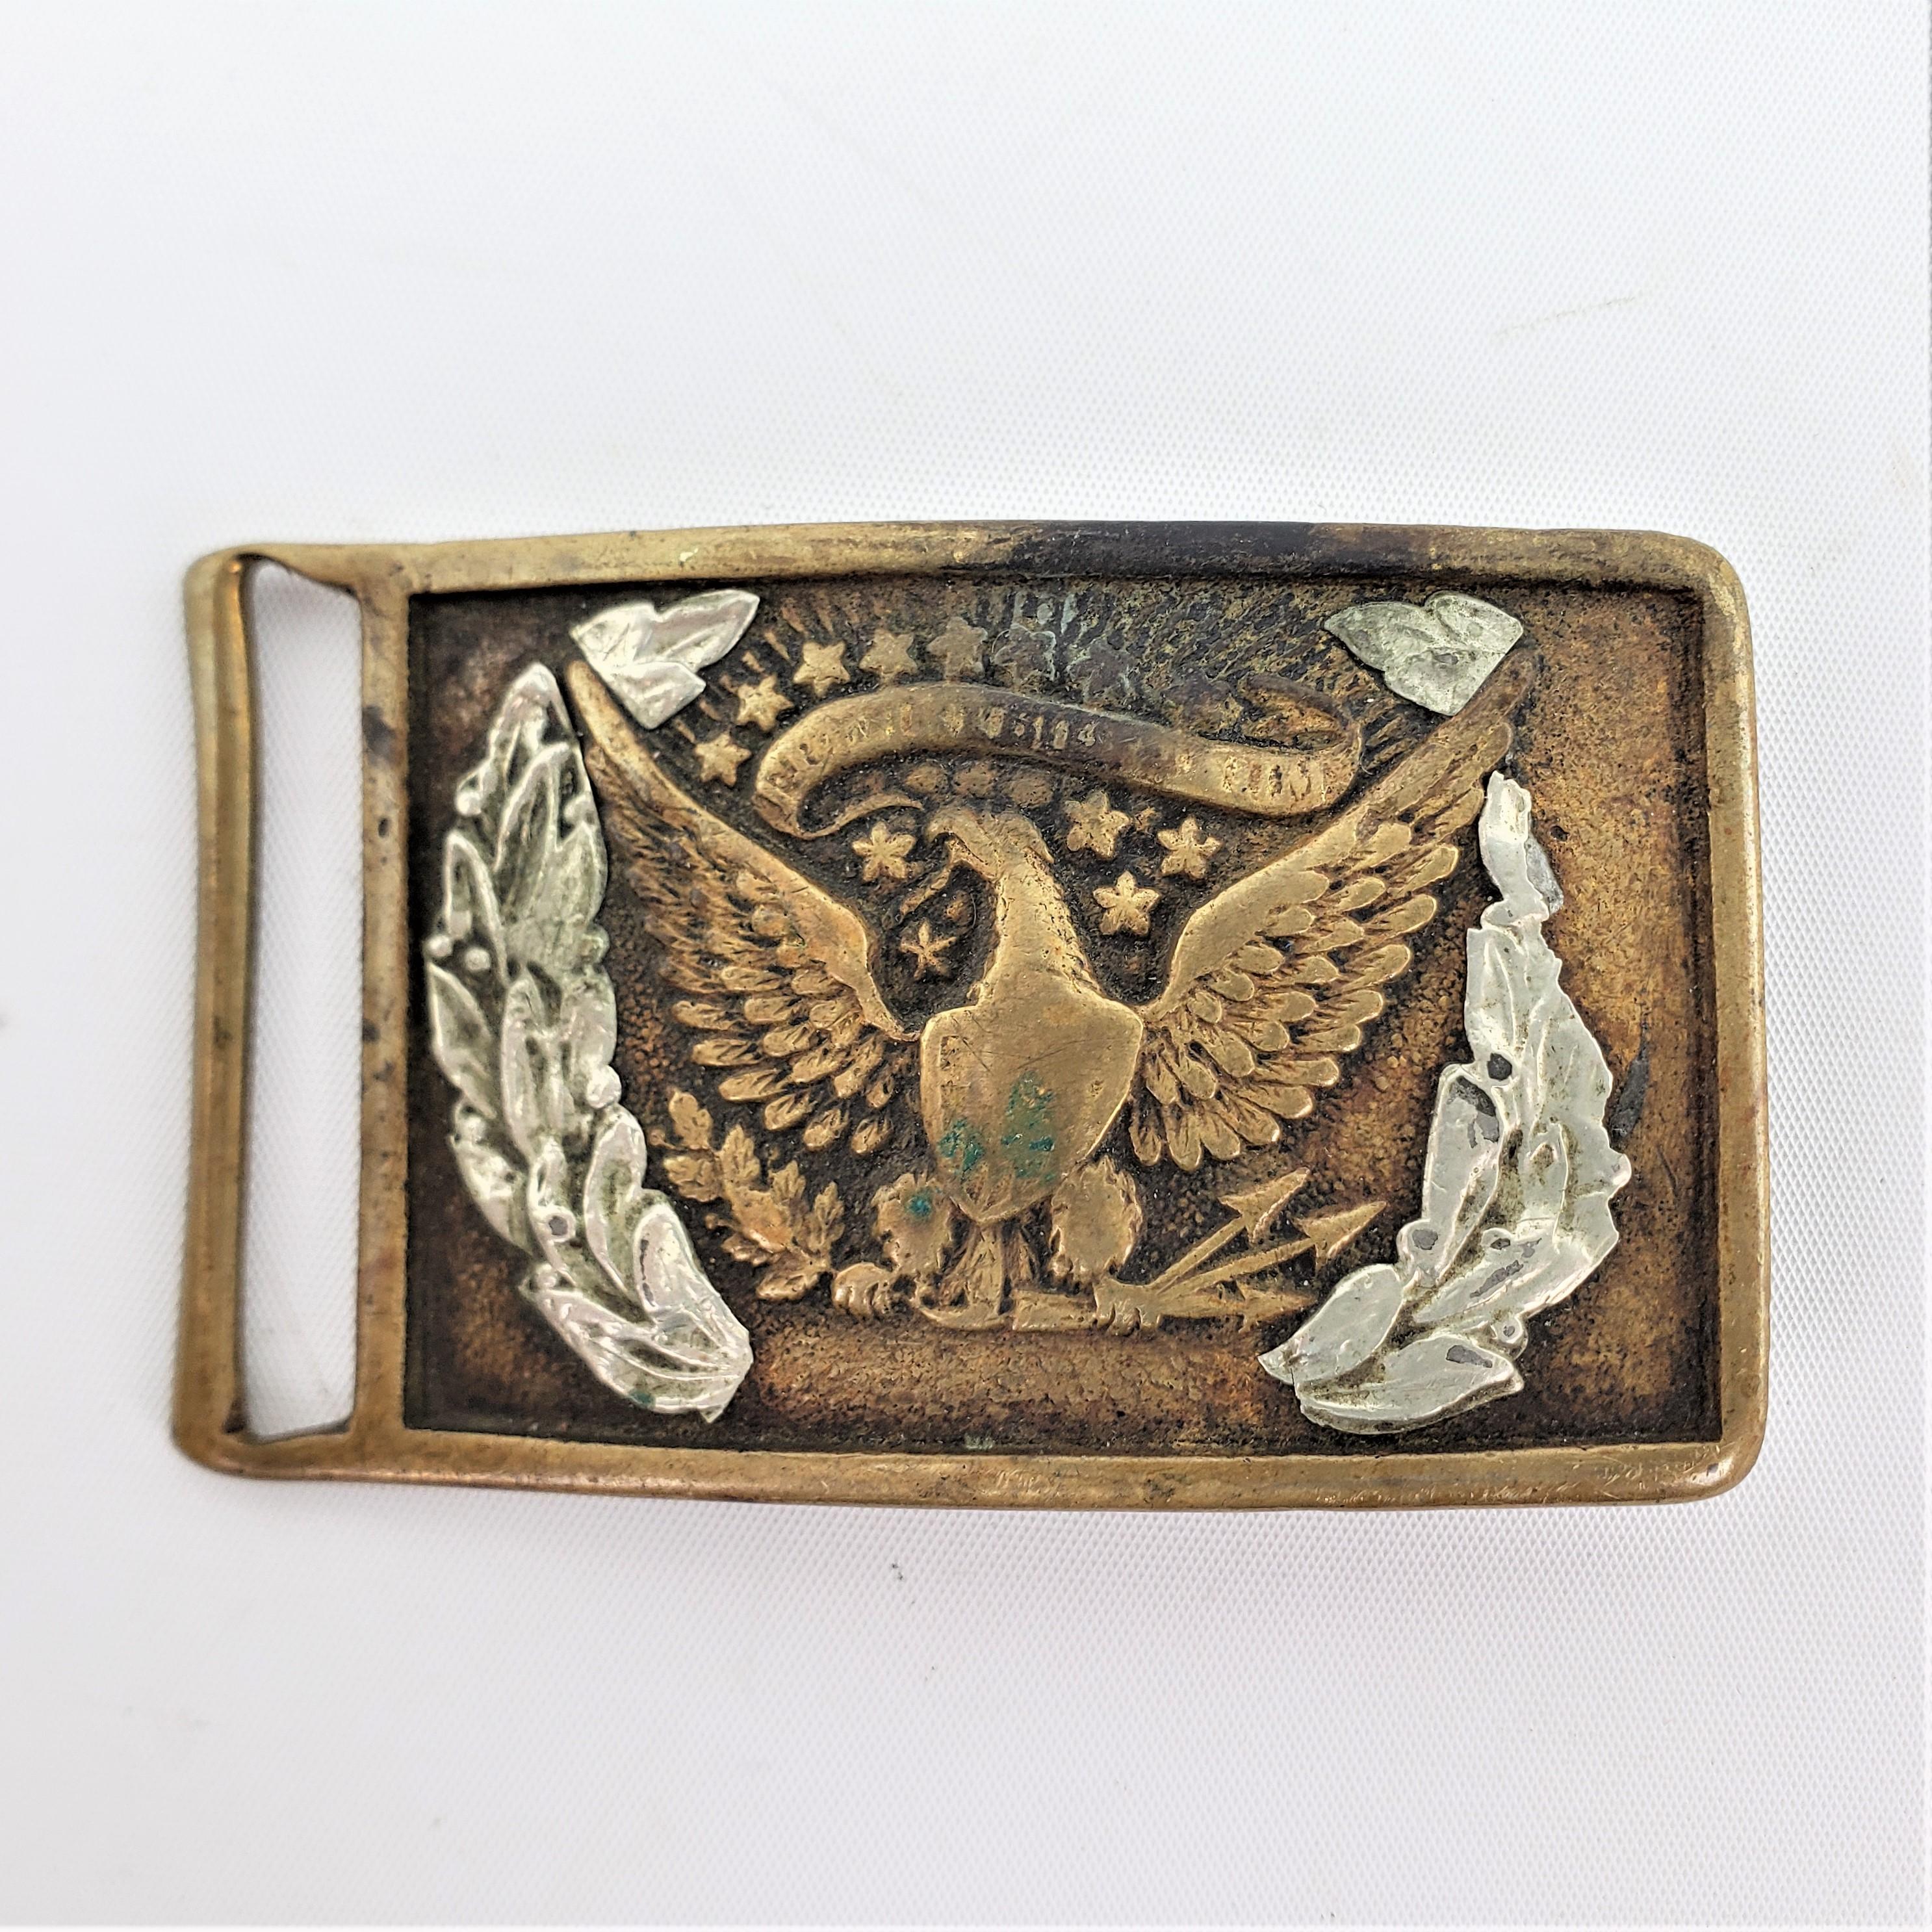 This brass Civil War era styled belt buckle is unsigned by the maker, but presumed to have been made in the United States in approximately 1851 in the period style. The buckle depicts an American eagle prominently in the center, with silvered